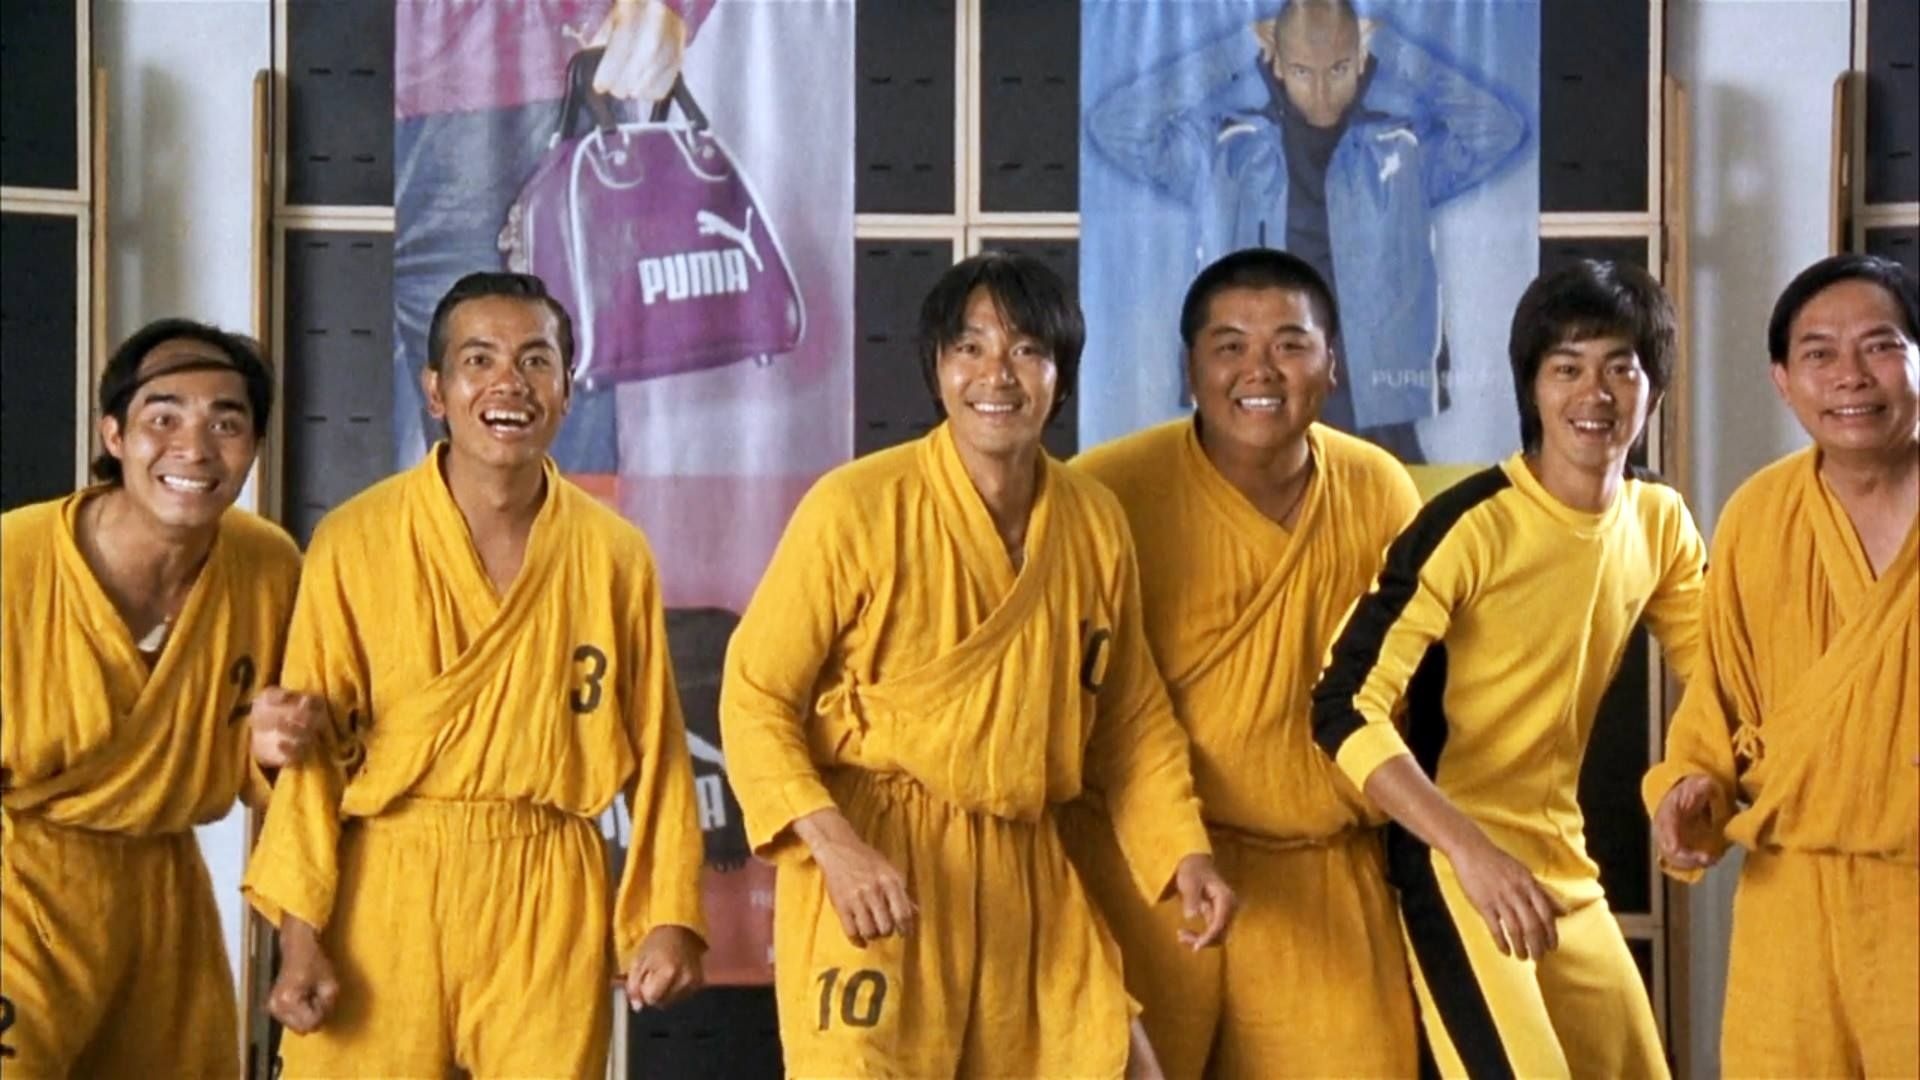 Shaolin Soccer: A team of misfits takes their best shot at winning a championship by mixing martial arts with football. 1920x1080 Full HD Background.